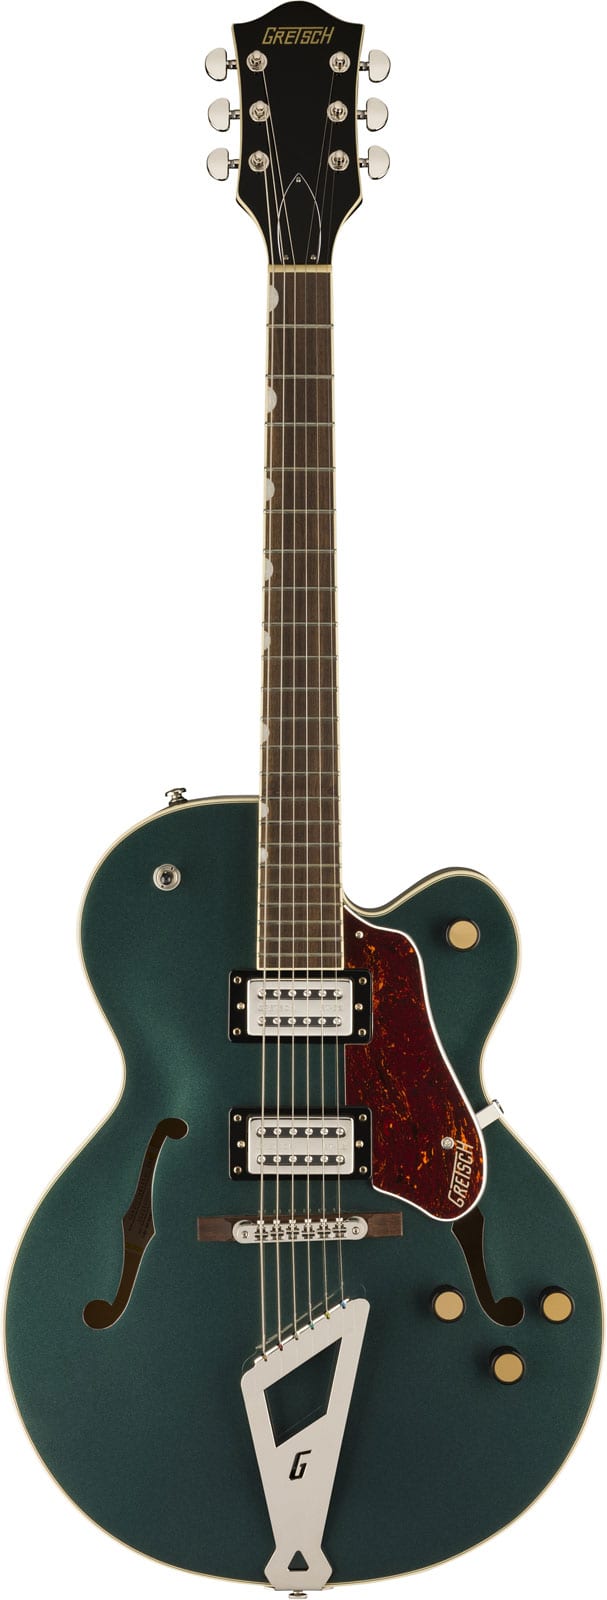 GRETSCH GUITARS G2420 STREAMLINER HOLLOW BODY WITH CHROMATIC II LRL BROAD'TRON BT-3S PICKUPS CADILLAC GREEN